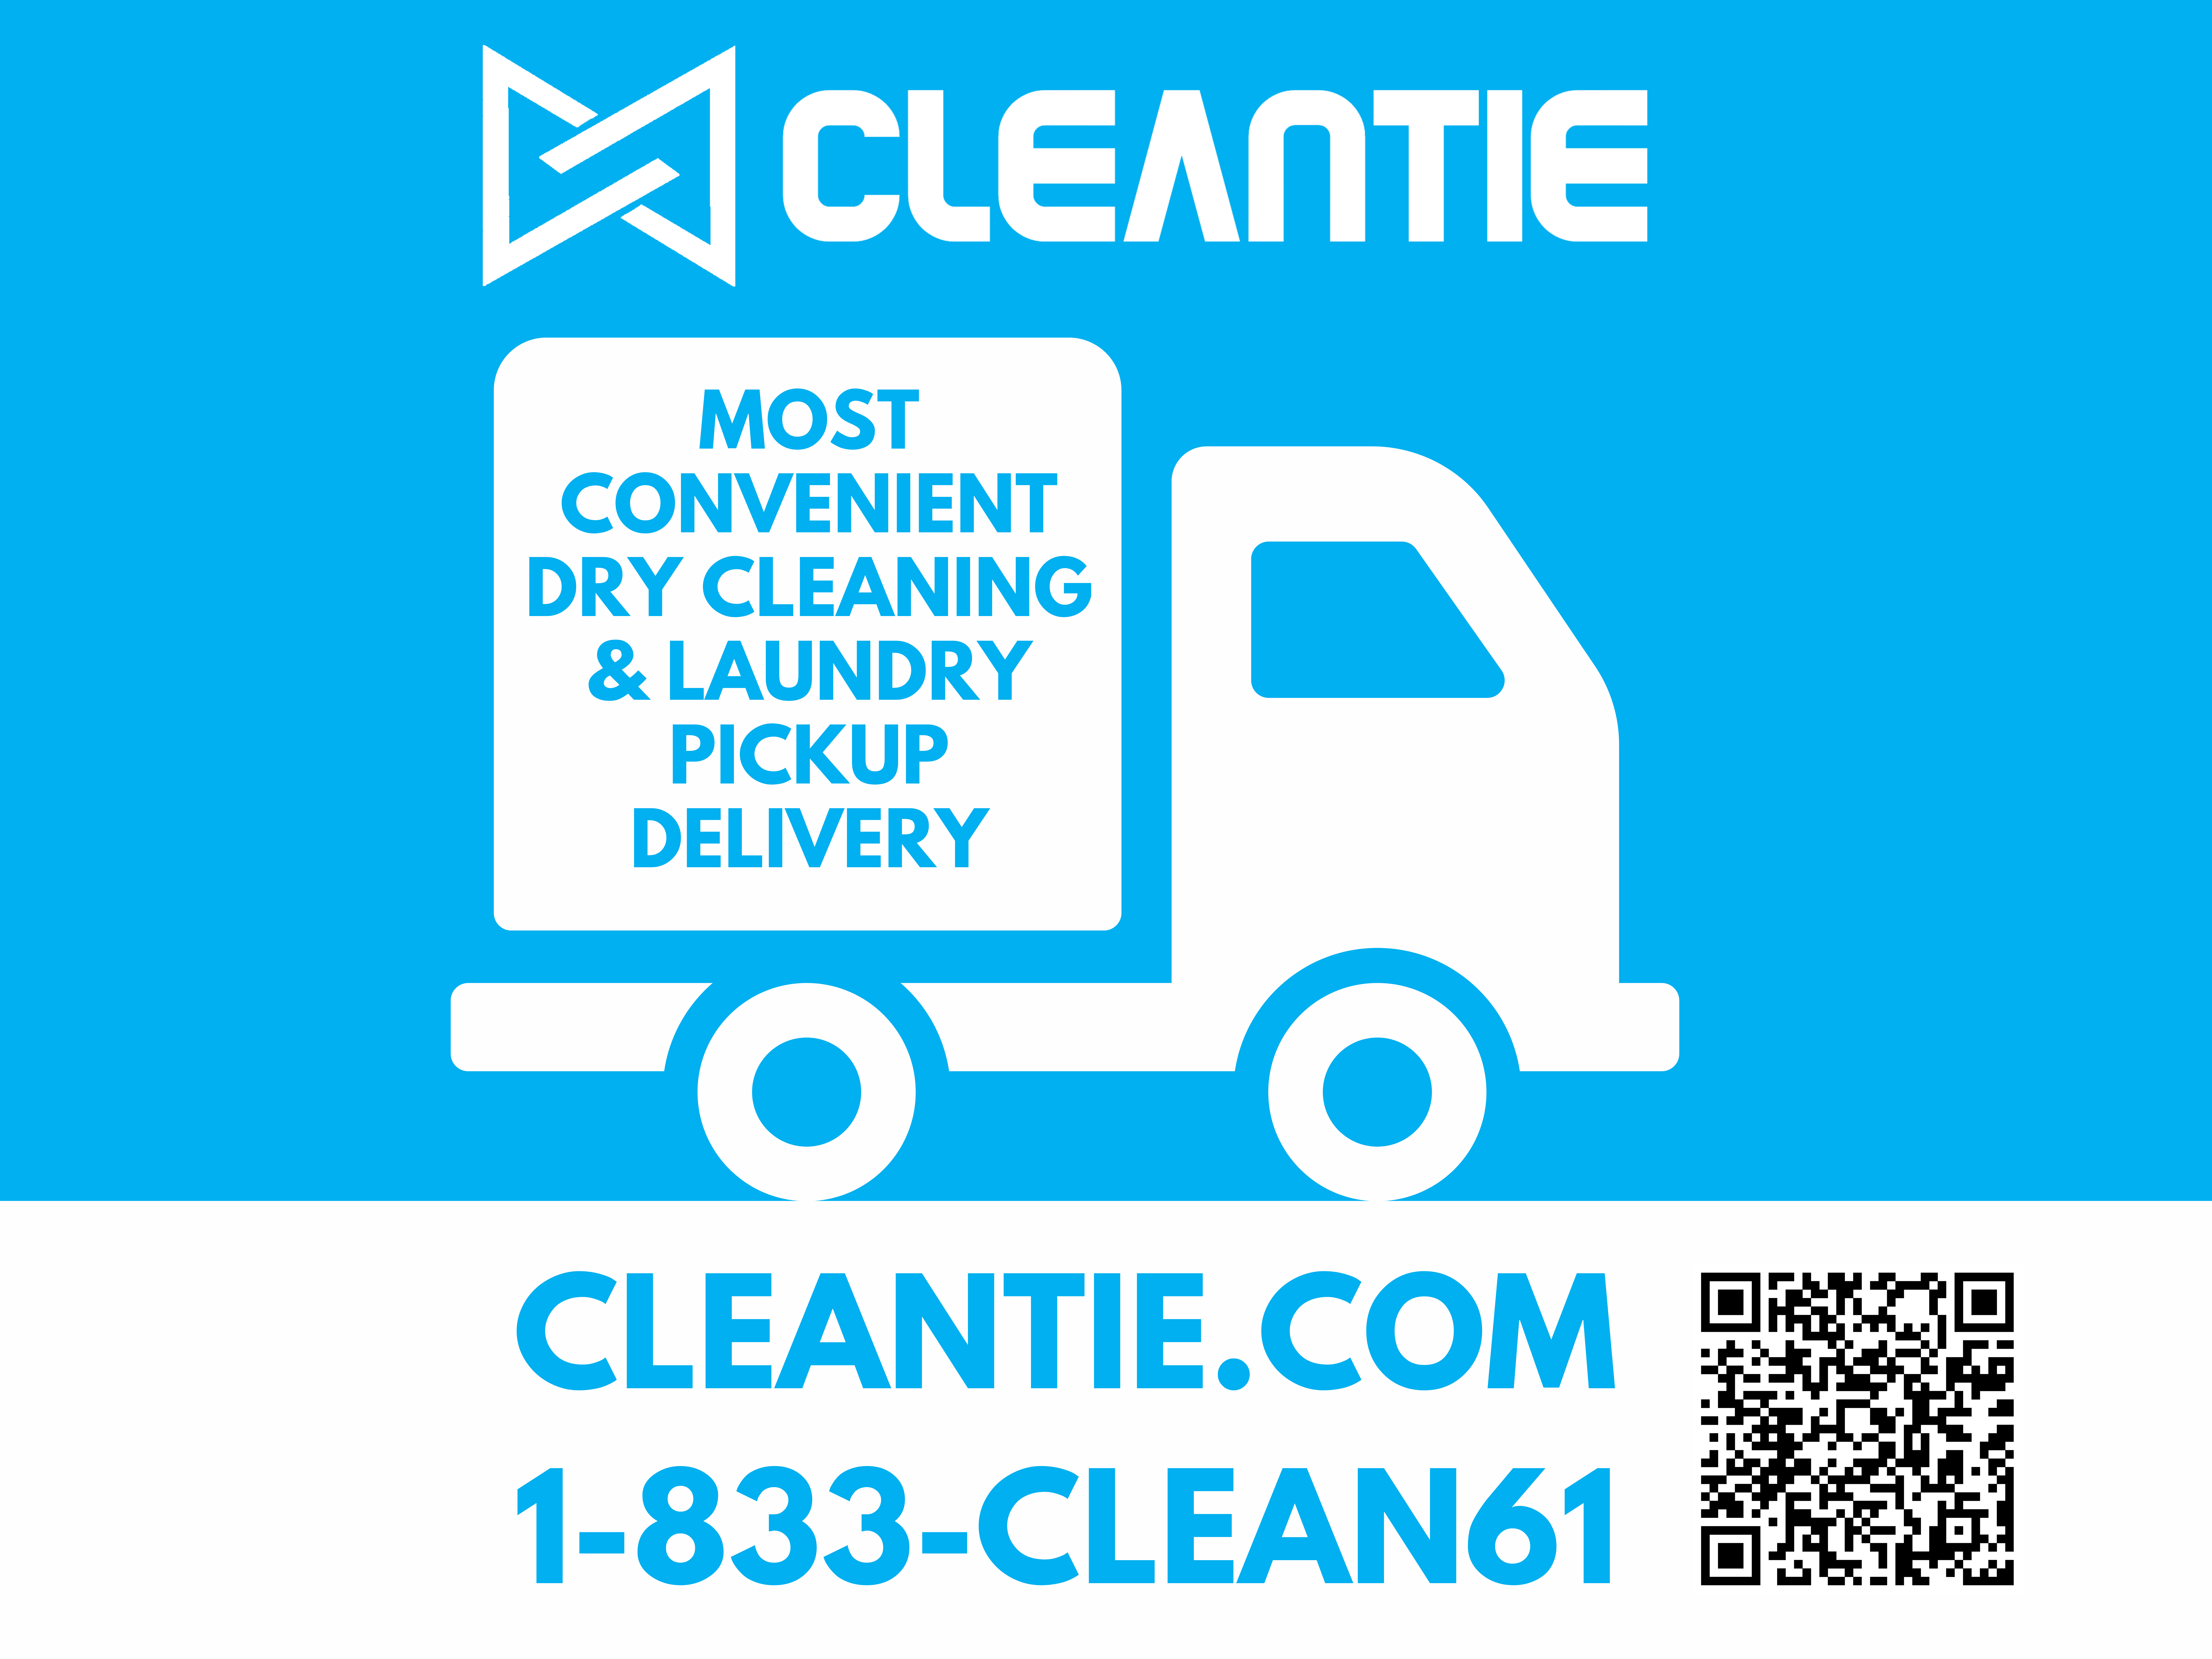 Cleantietruck__48_x_36_in__4.png